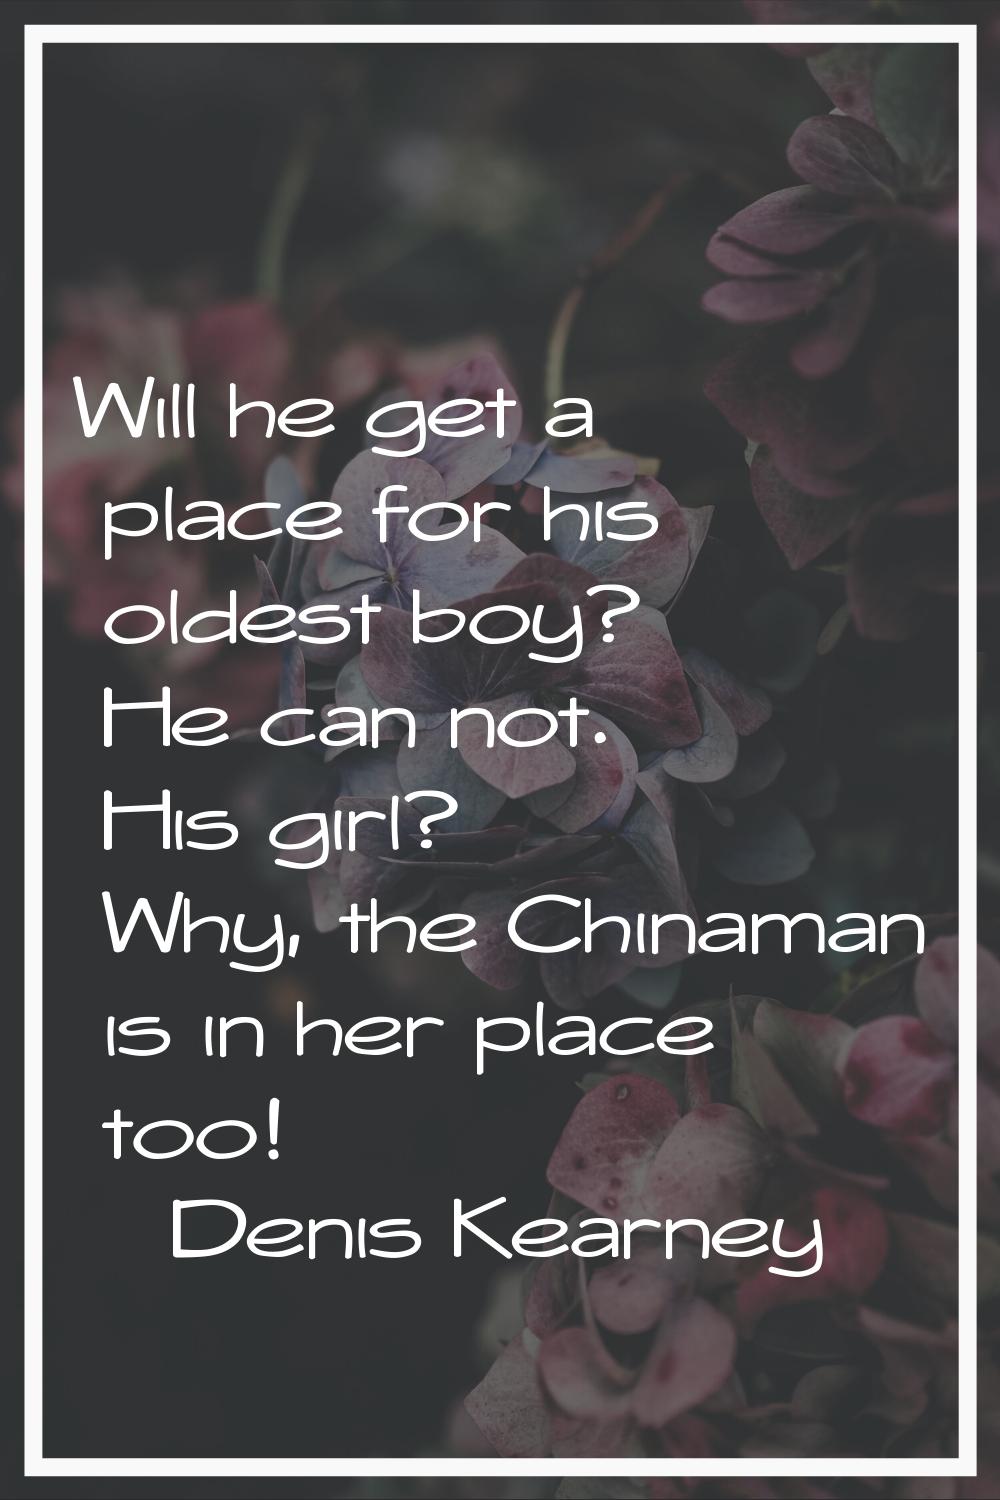 Will he get a place for his oldest boy? He can not. His girl? Why, the Chinaman is in her place too